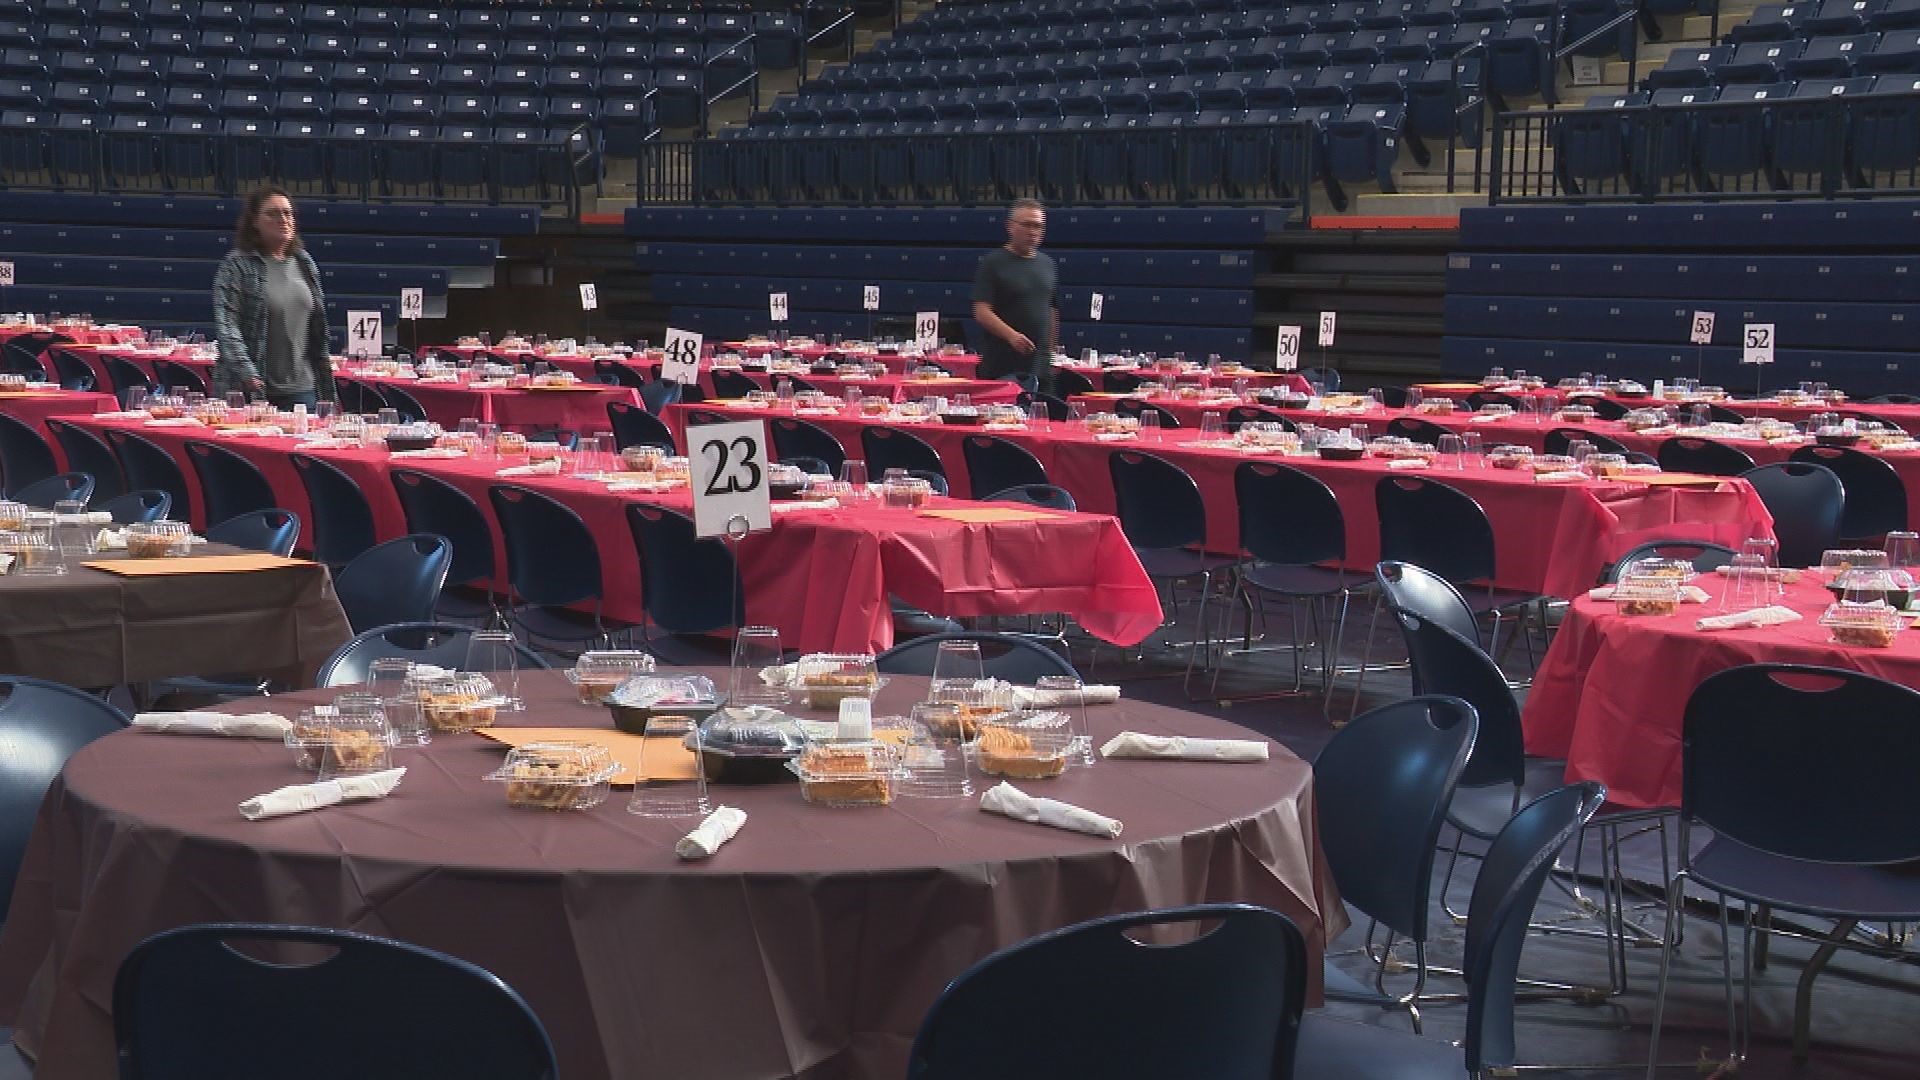 Hope College is a partner of the event and hosted the banquet at the Richard and Helen DeVos Fieldhouse Wednesday evening.